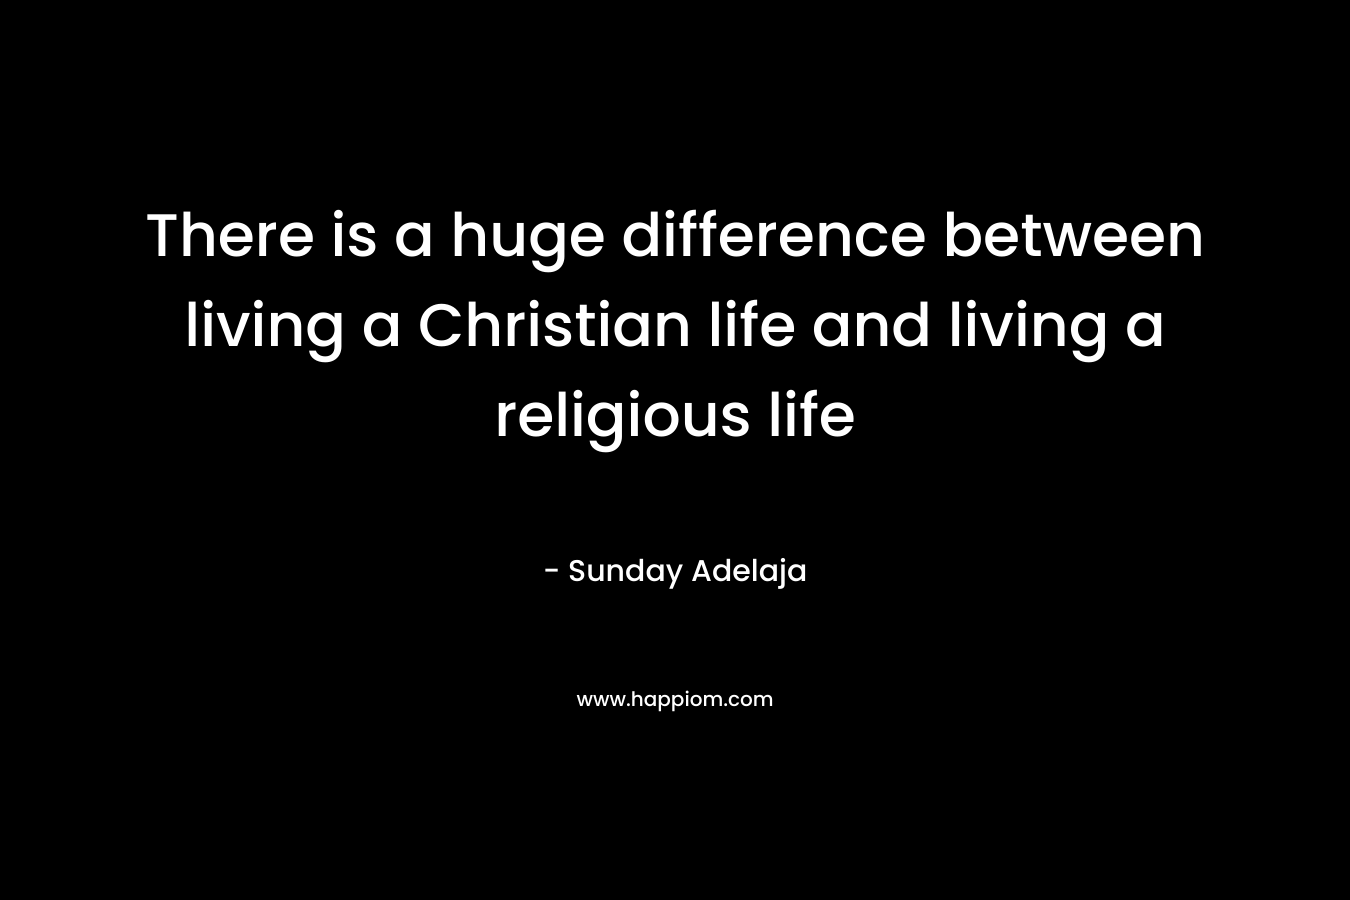 There is a huge difference between living a Christian life and living a religious life